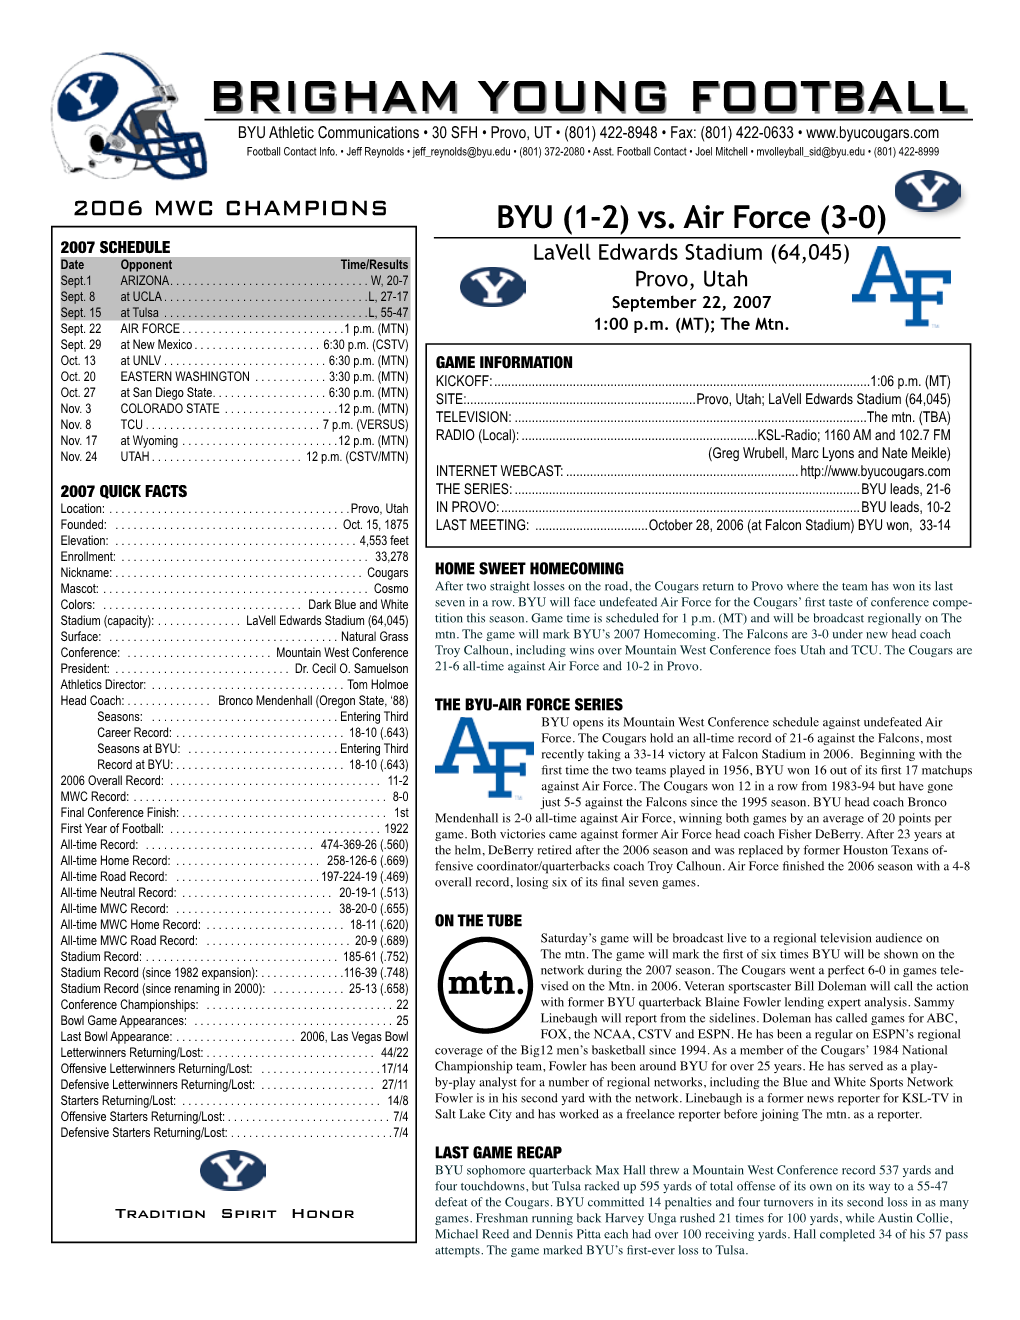 BRIGHAM YOUNG FOOTBALL BYU Athletic Communications • 30 SFH • Provo, UT • (801) 422-8948 • Fax: (801) 422-0633 • Football Contact Info